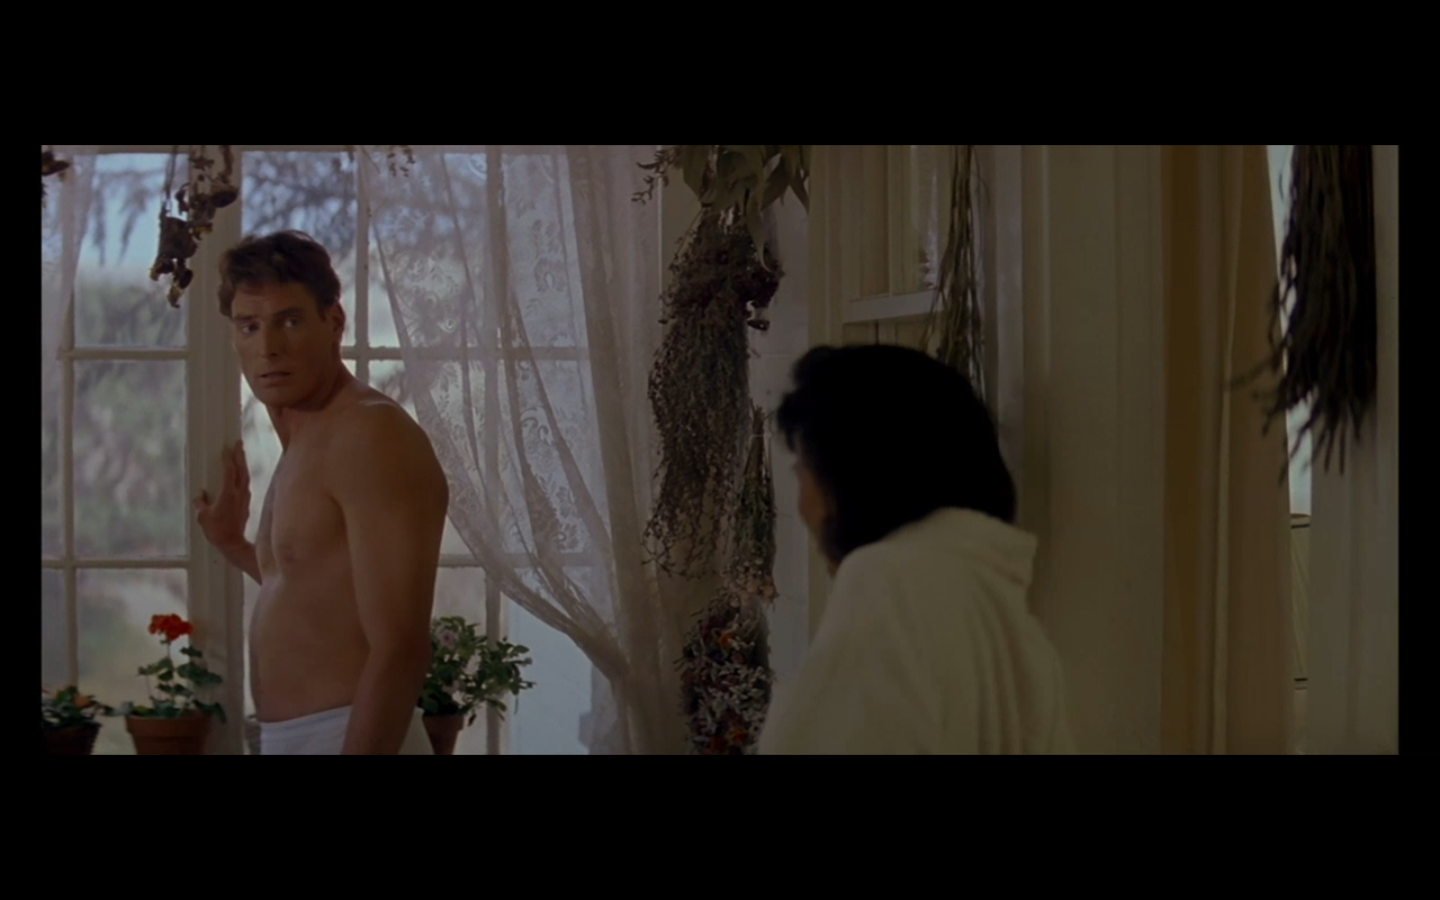 Christopher reeve shirtless